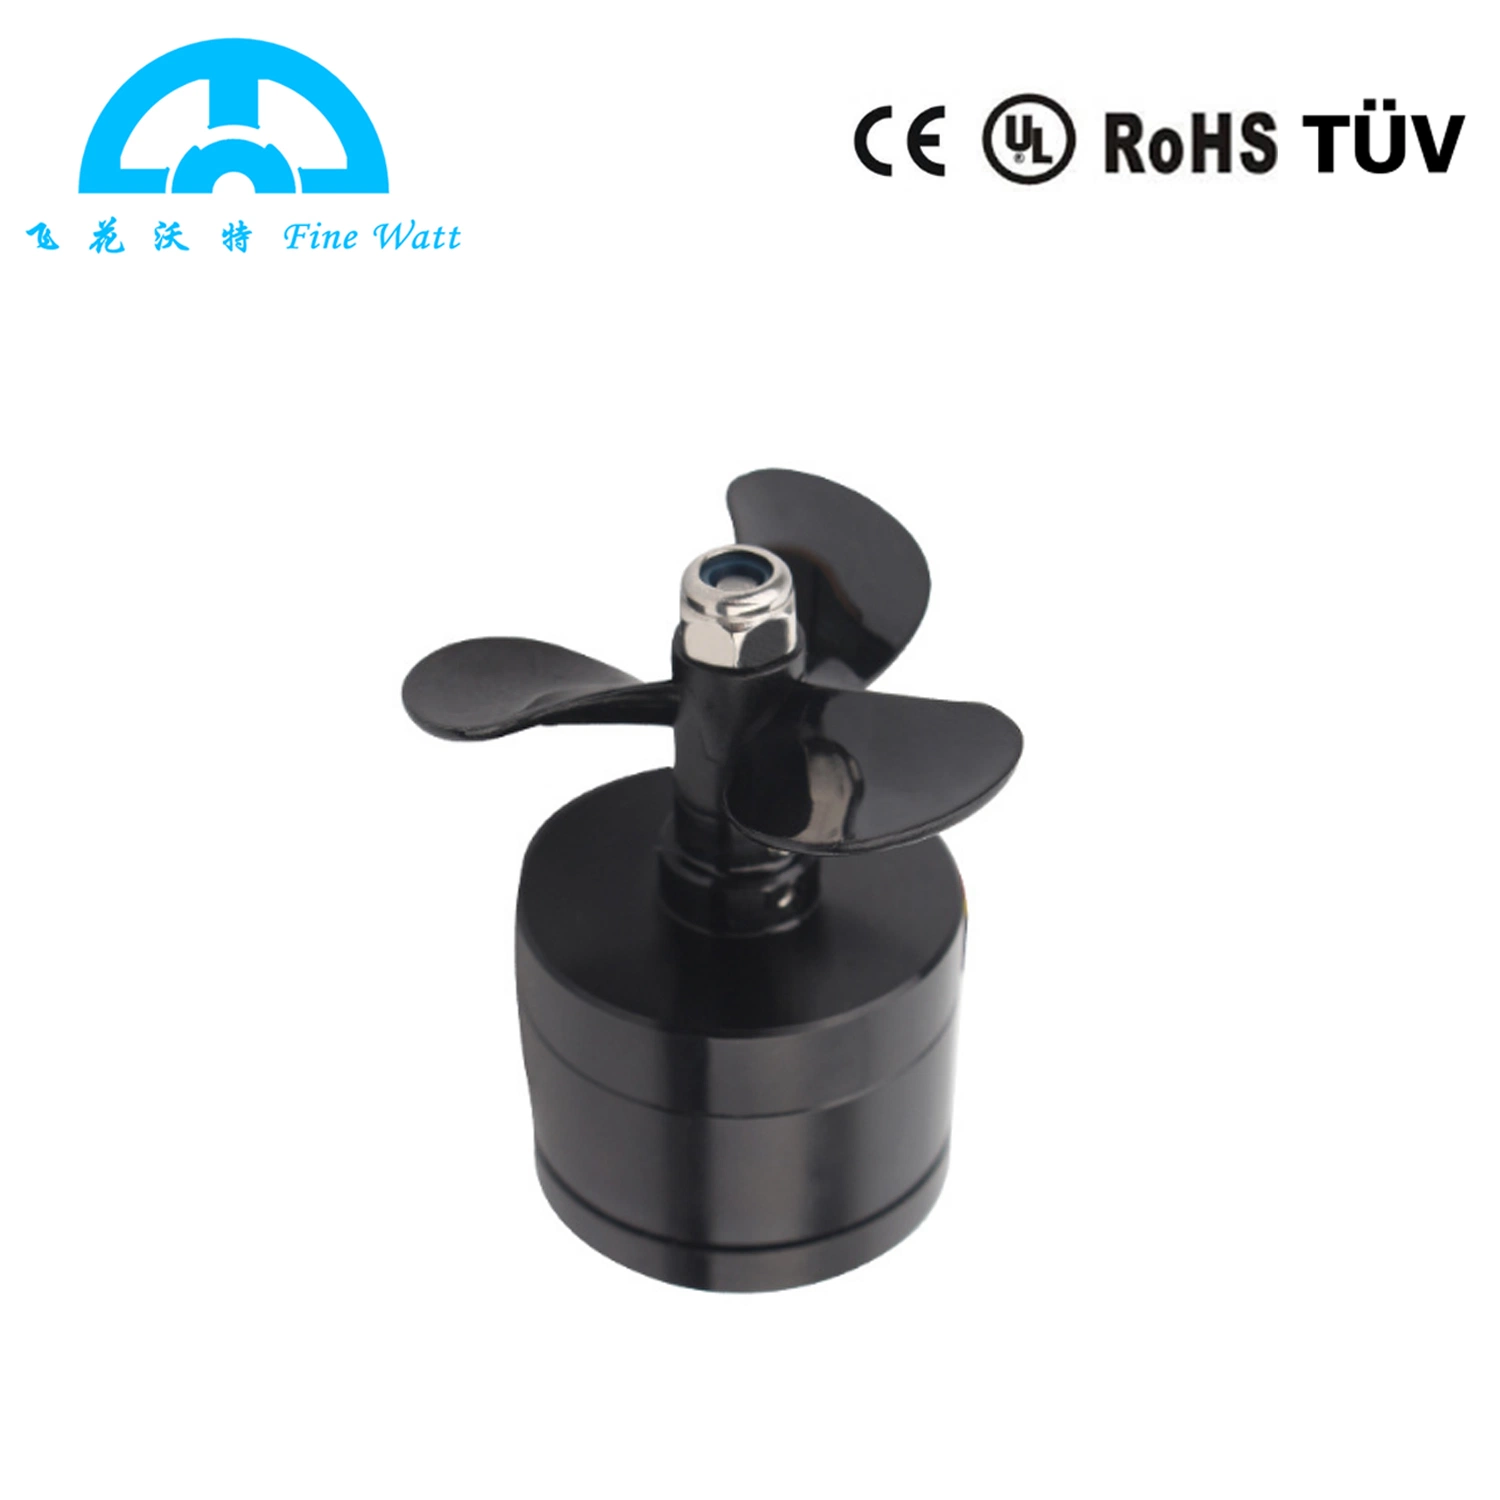 Brushless DC Motor for Deep Water Motor/Remotely Operated Vehicle/Rov Robot/Submersible Motor/Special Potting Motor/Diving Motor